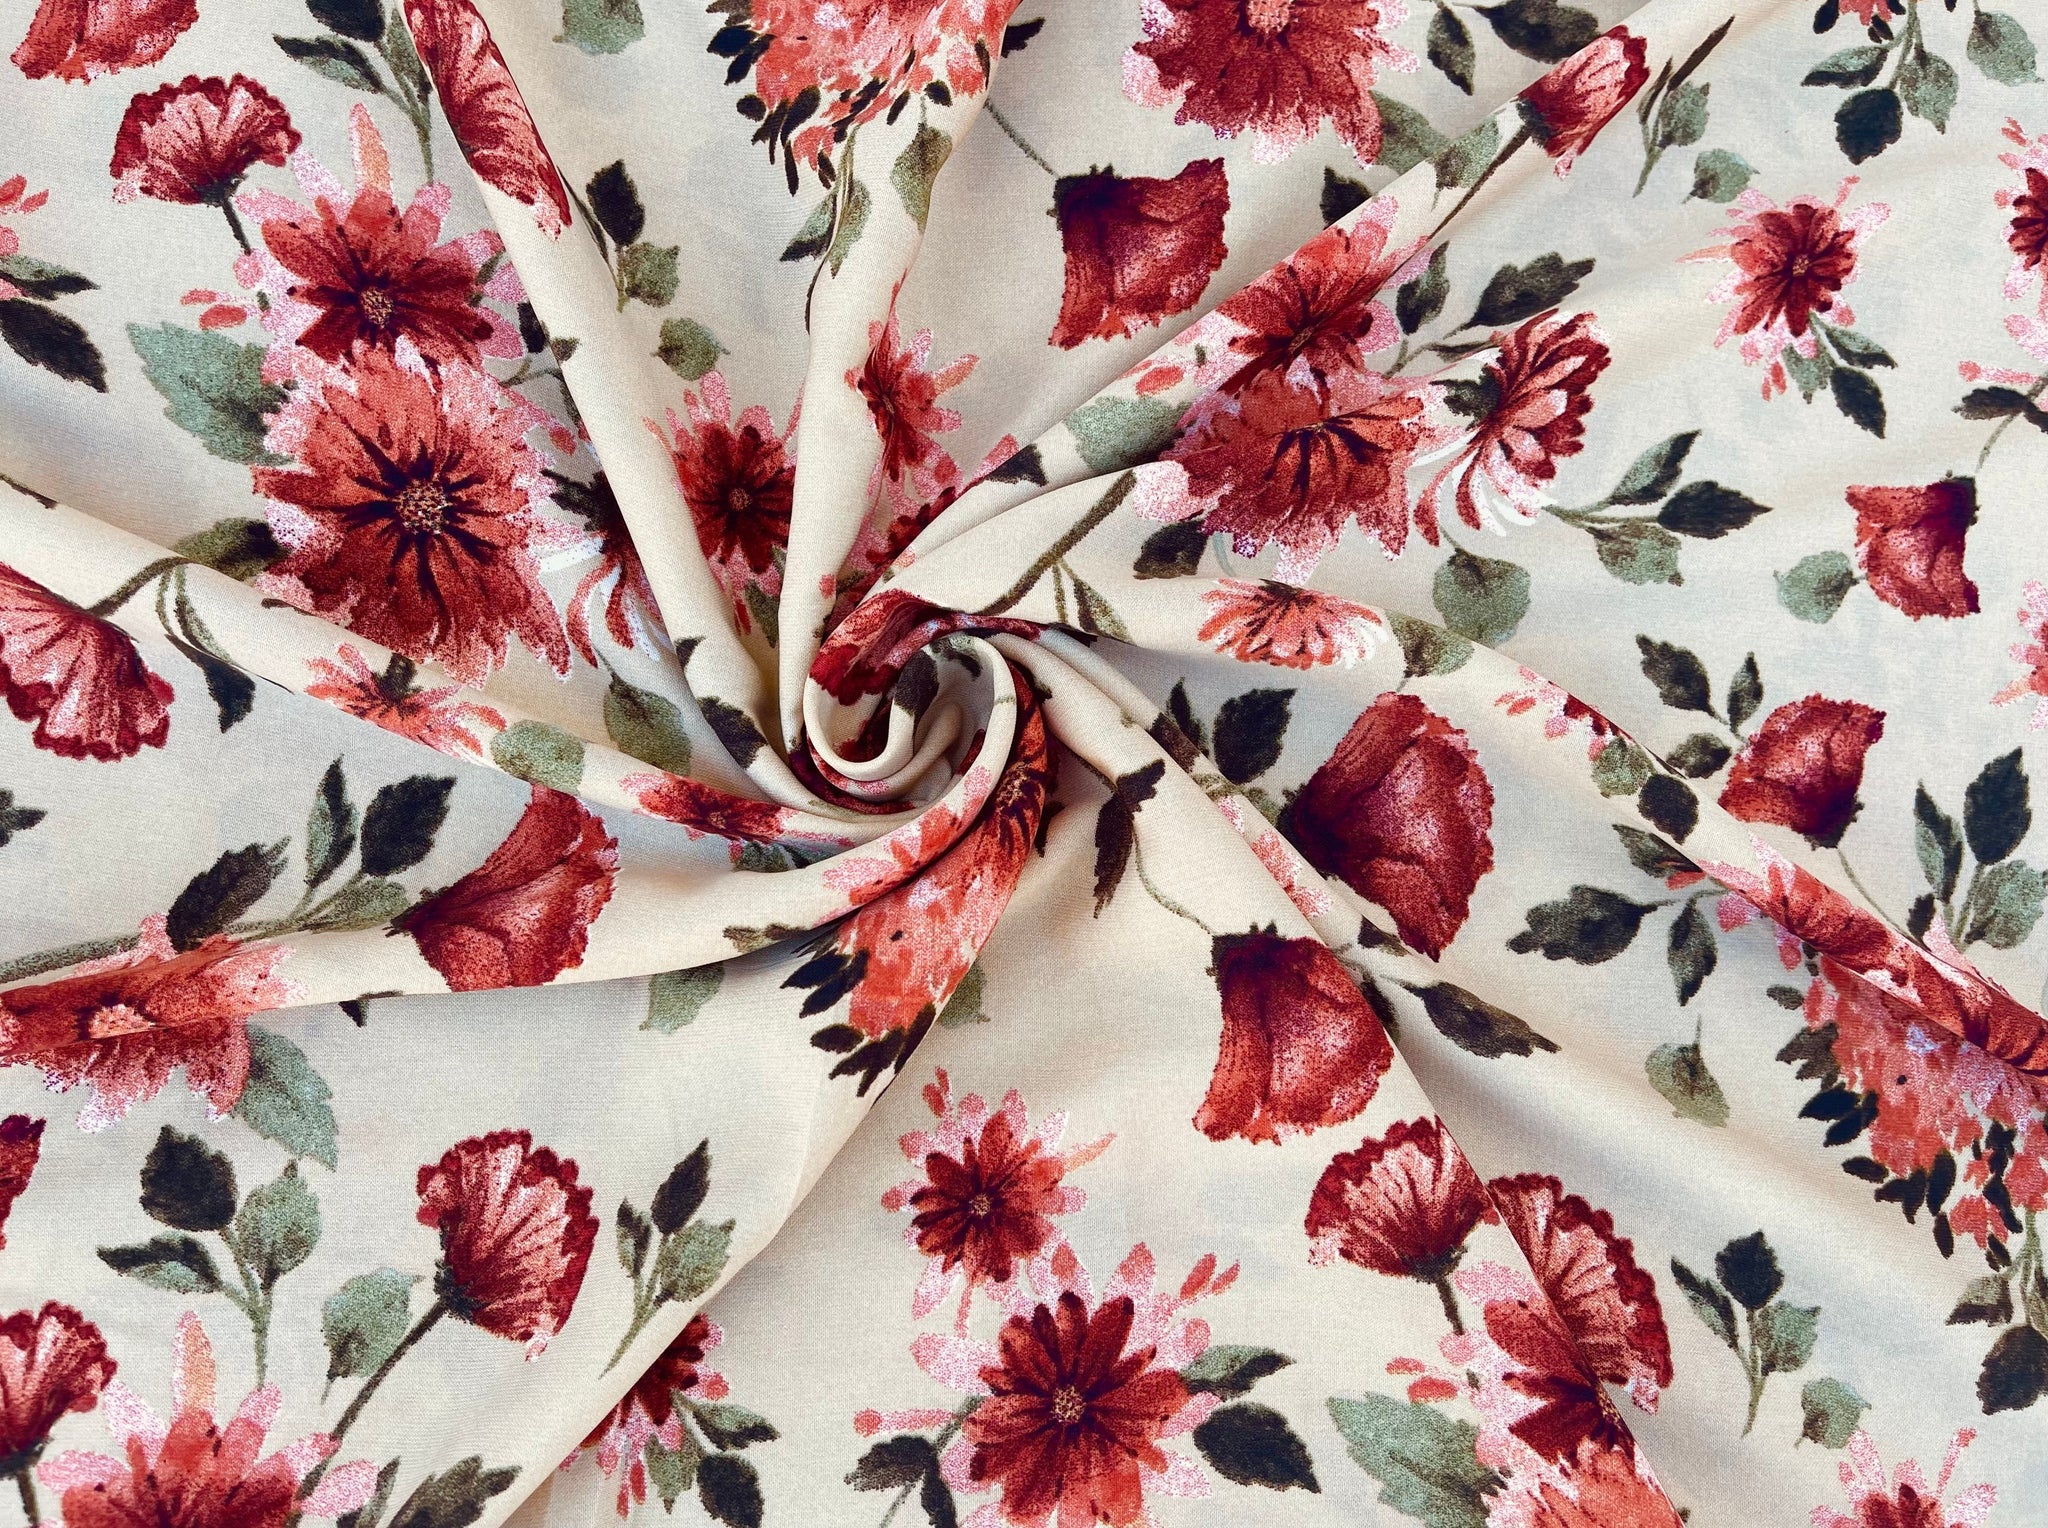 Woolpeach fabric by the yard - Burnt orange and green on taupe floral ...